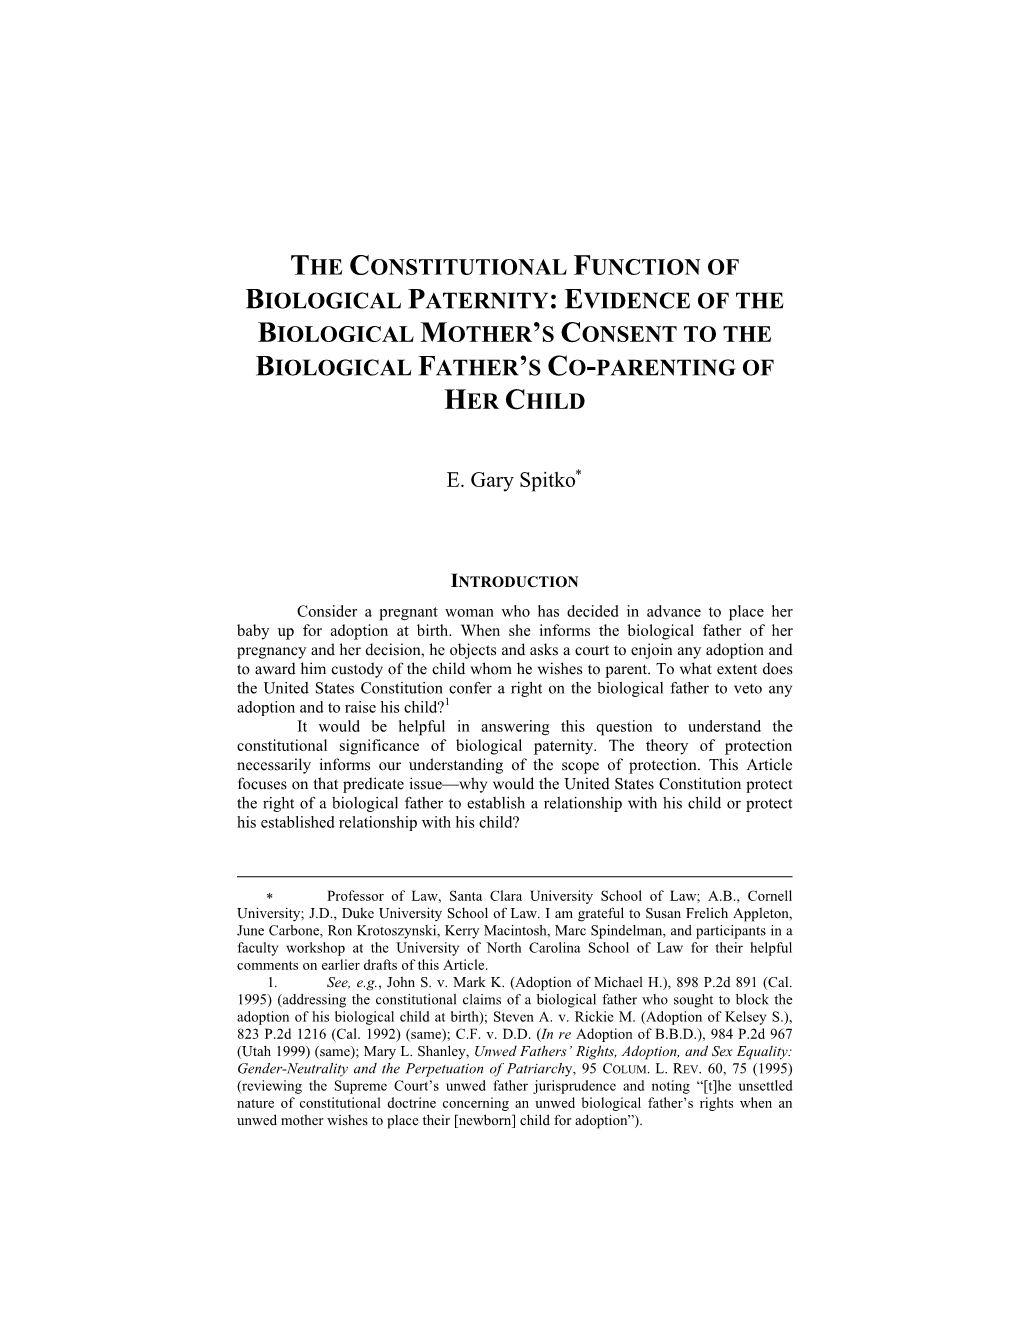 The Constitutional Function of Biological Paternity: Evidence of the Biological Mother’S Consent to the Biological Father’S Co-Parenting of Her Child